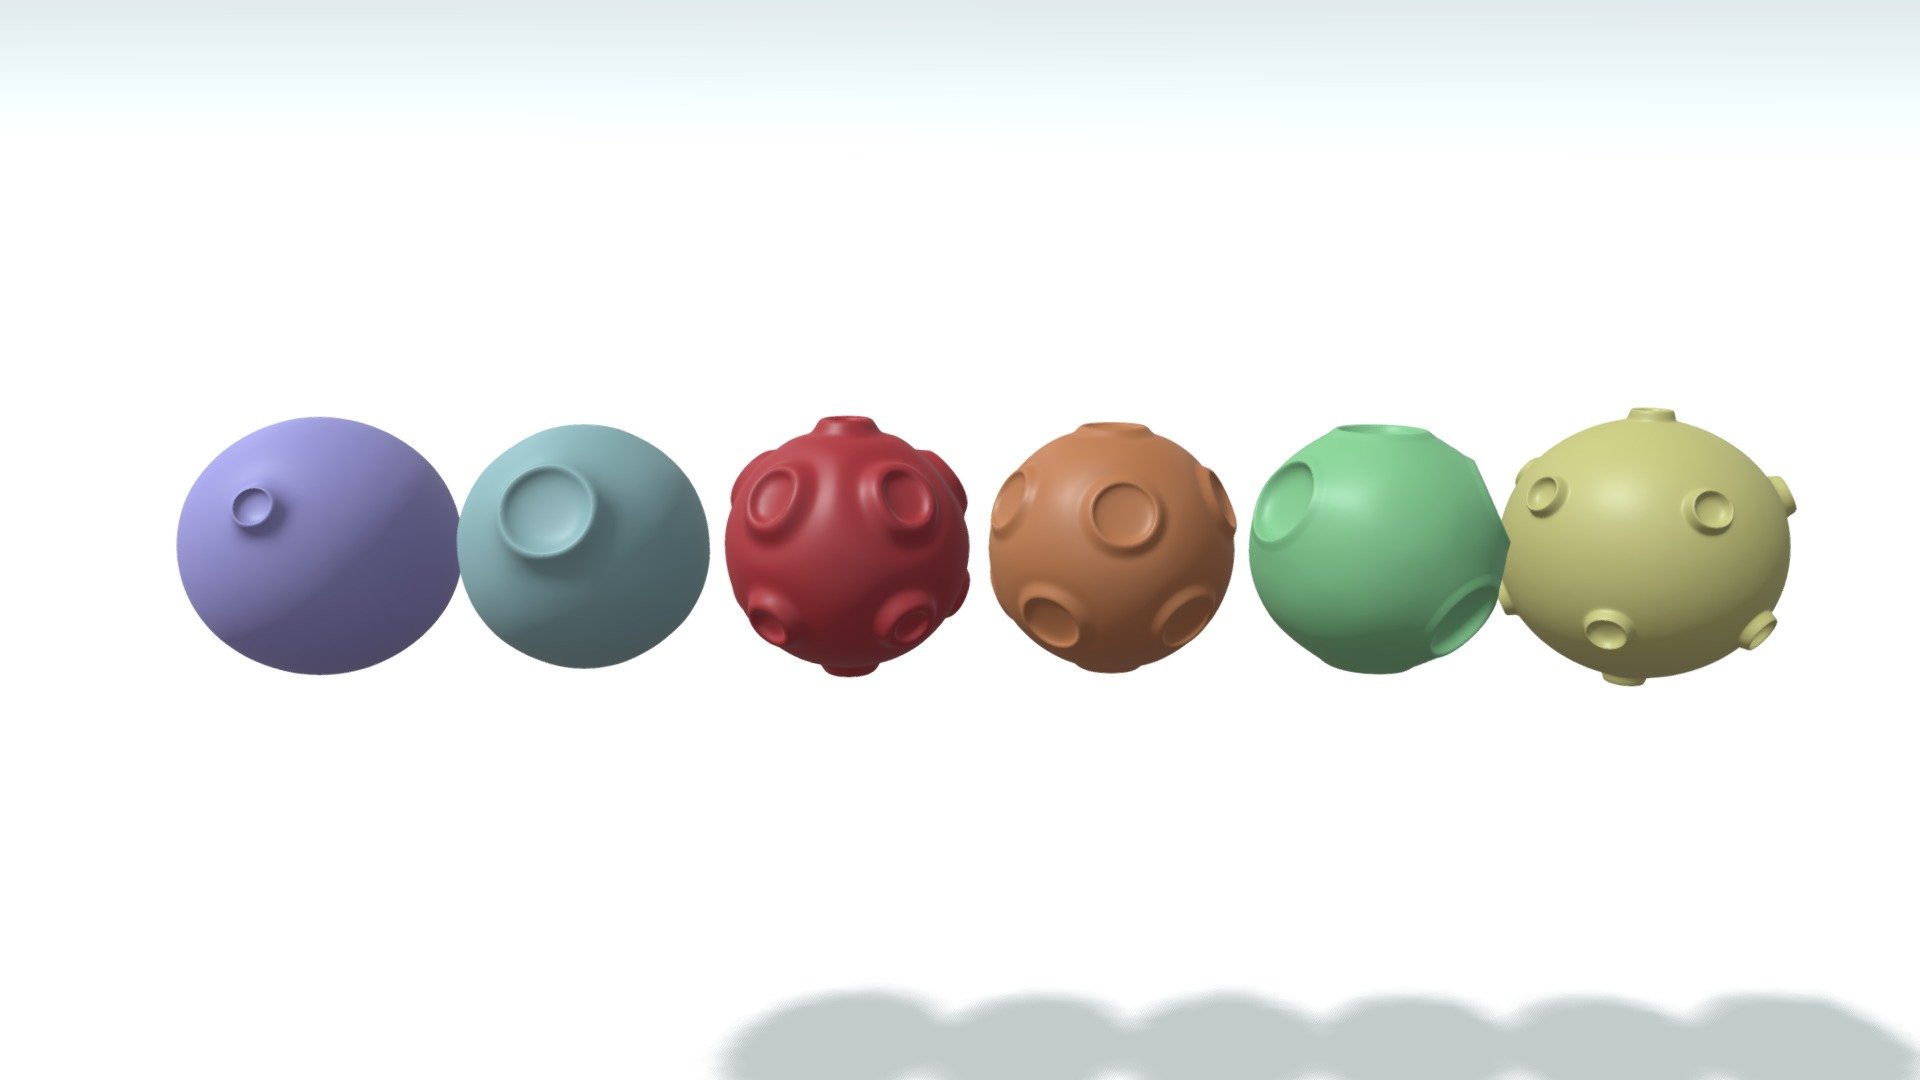 -Cartoon Cute Planets Stars Collection 1.

-This project contains 30 Planets objects.

-Subdivision 3 5 Moons Total : Vert : 96,172, Poly : 96,160.

-Subdivision 2 5 Moons Total : Vert : 24,053, Poly : 24,040.

-Subdivision 1 5 Moons Total : Vert : 6,022, Poly : 6,010.

-Subdivision 0 5 Moons Total : Vert : 1,343, Poly : 1,674.

-This product was created in Blender 2.8.

-Formats: blend, fbx, obj, c4d, dae, abc, stl, glb,unitypackage.

-We hope you enjoy this model.

-Thank you 3d model